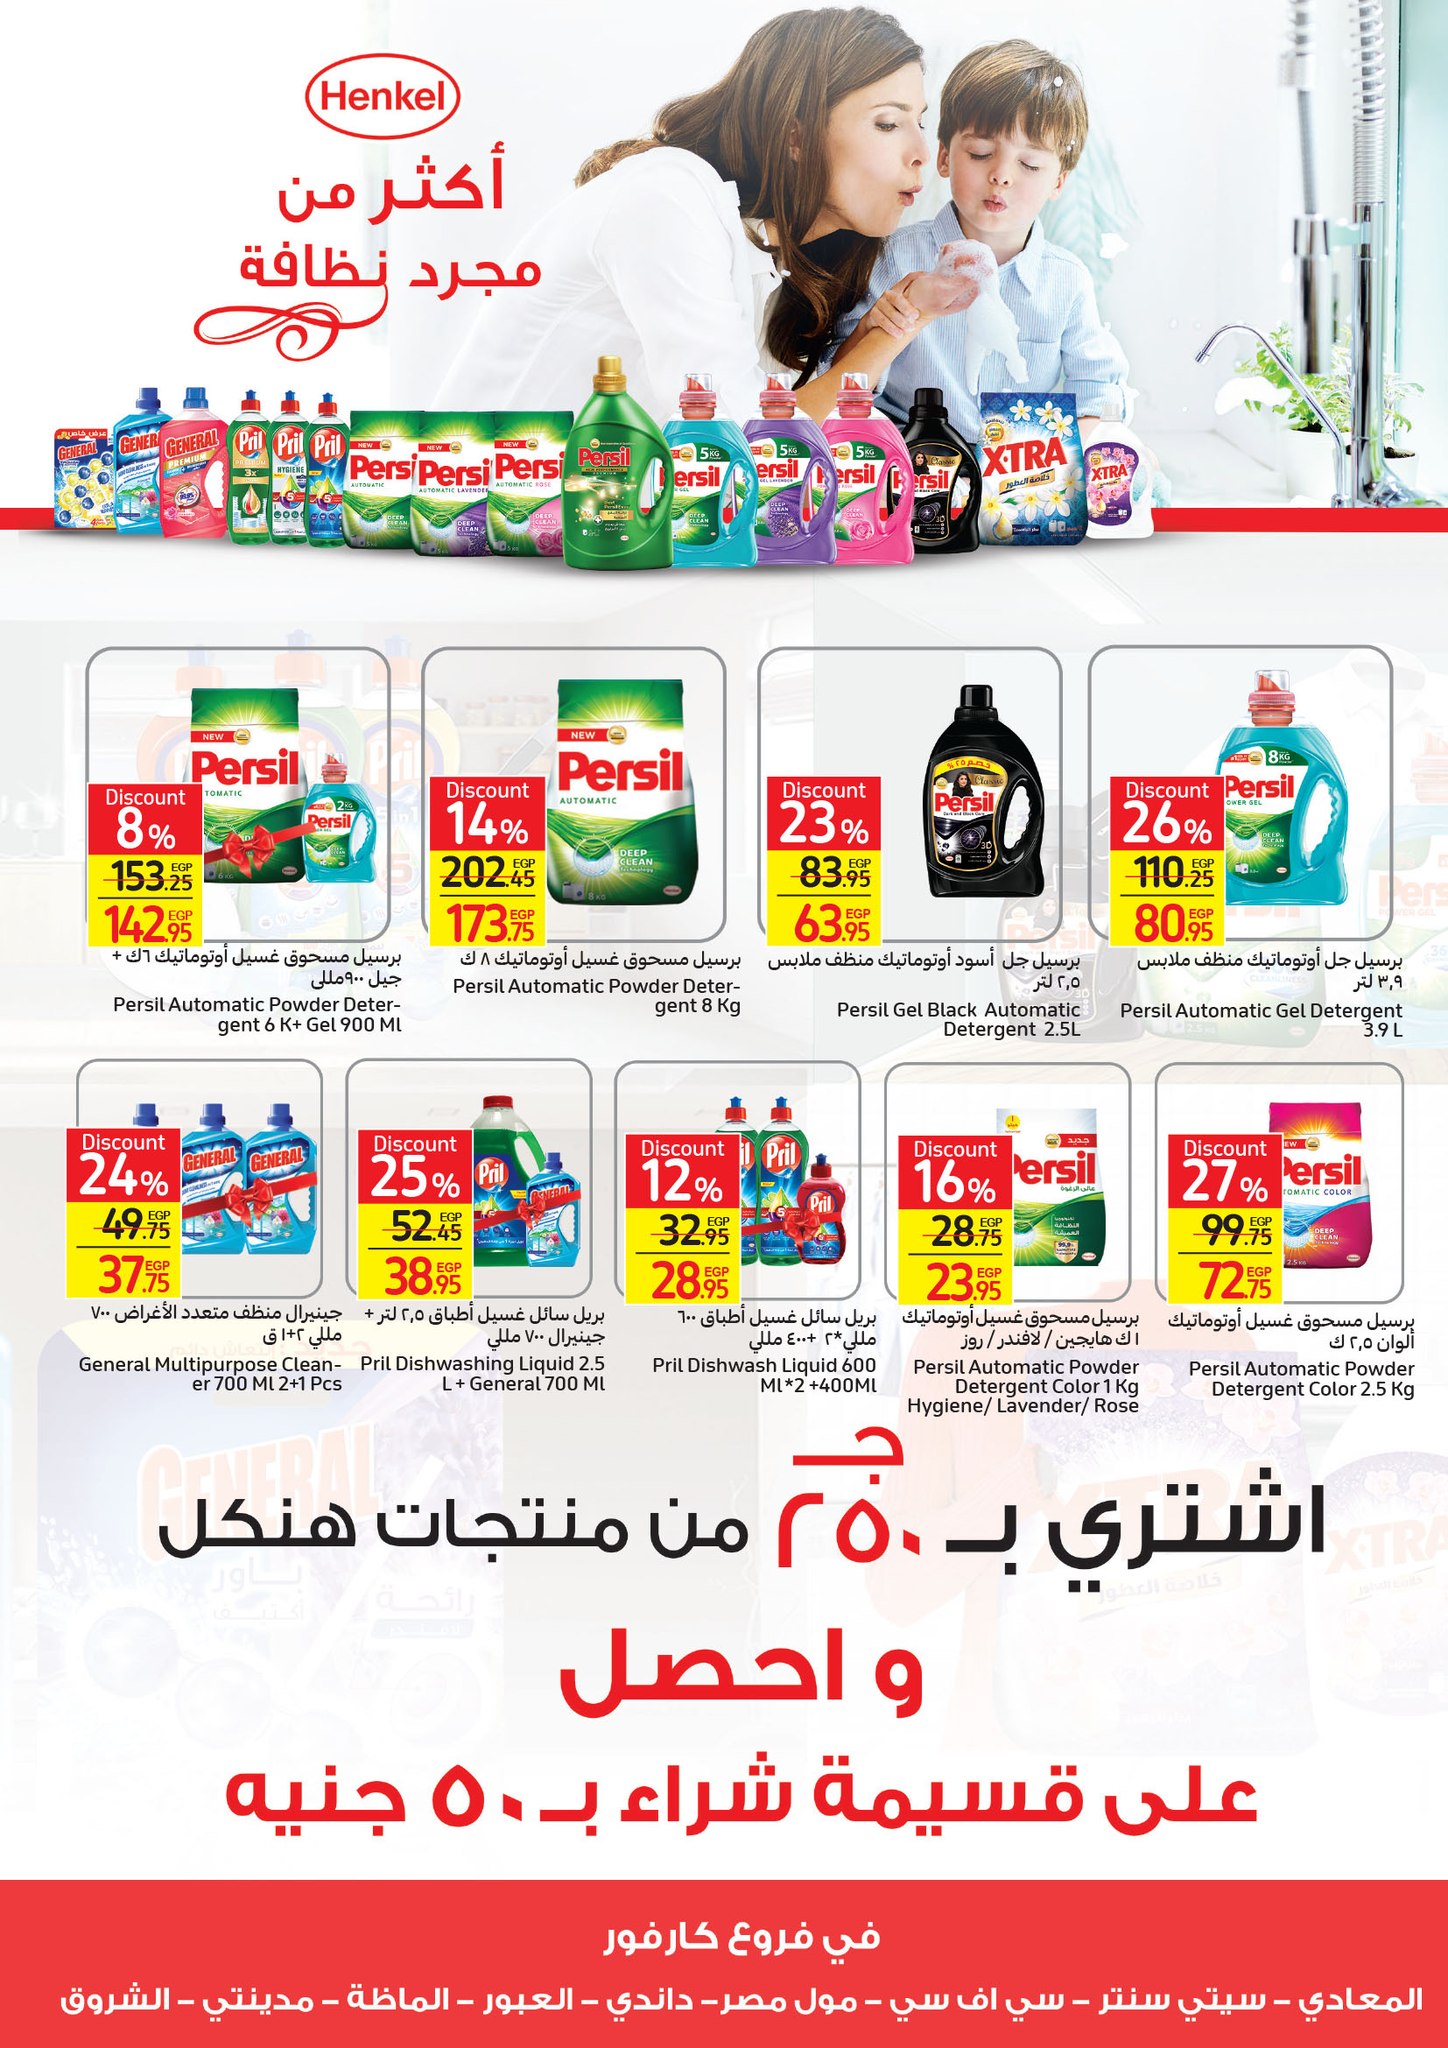 Watch the latest Carrefour half price offers "Last Chance Offer" until December 4, 31